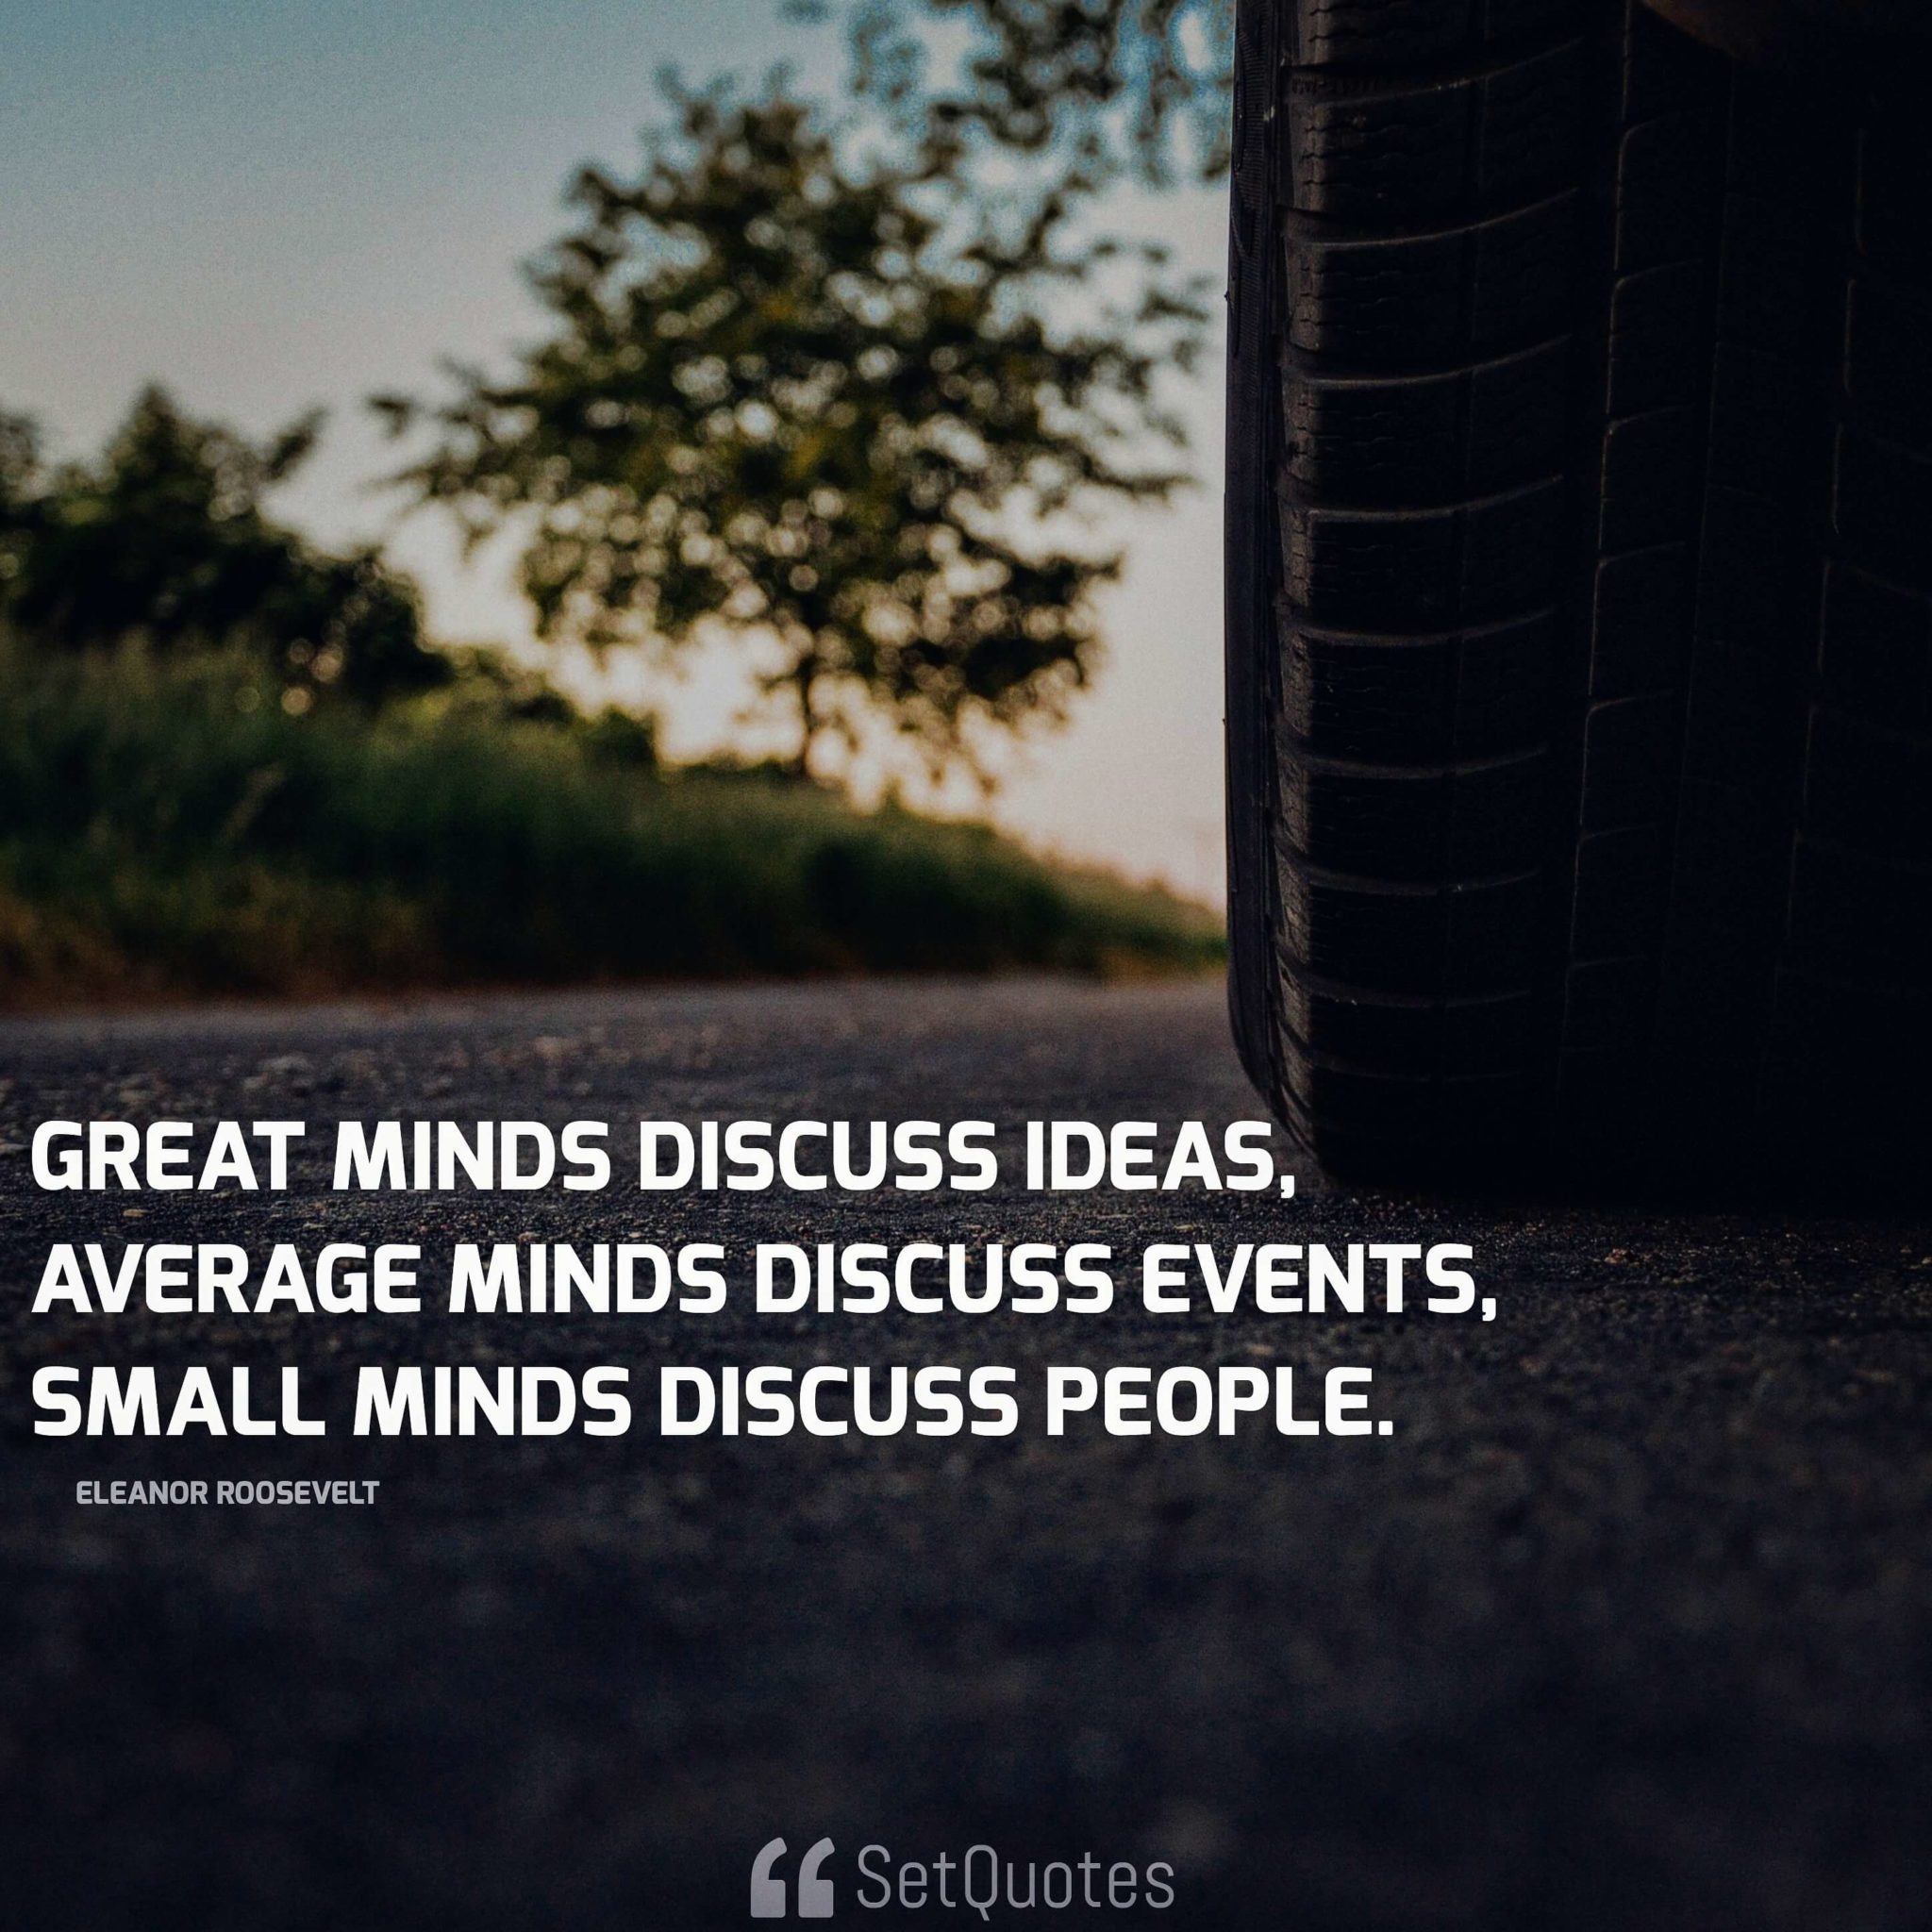 Great-minds-discuss-ideas-average-minds-discuss-events-small-minds-discuss-people.-Eleanor-Roosevelt.jpg